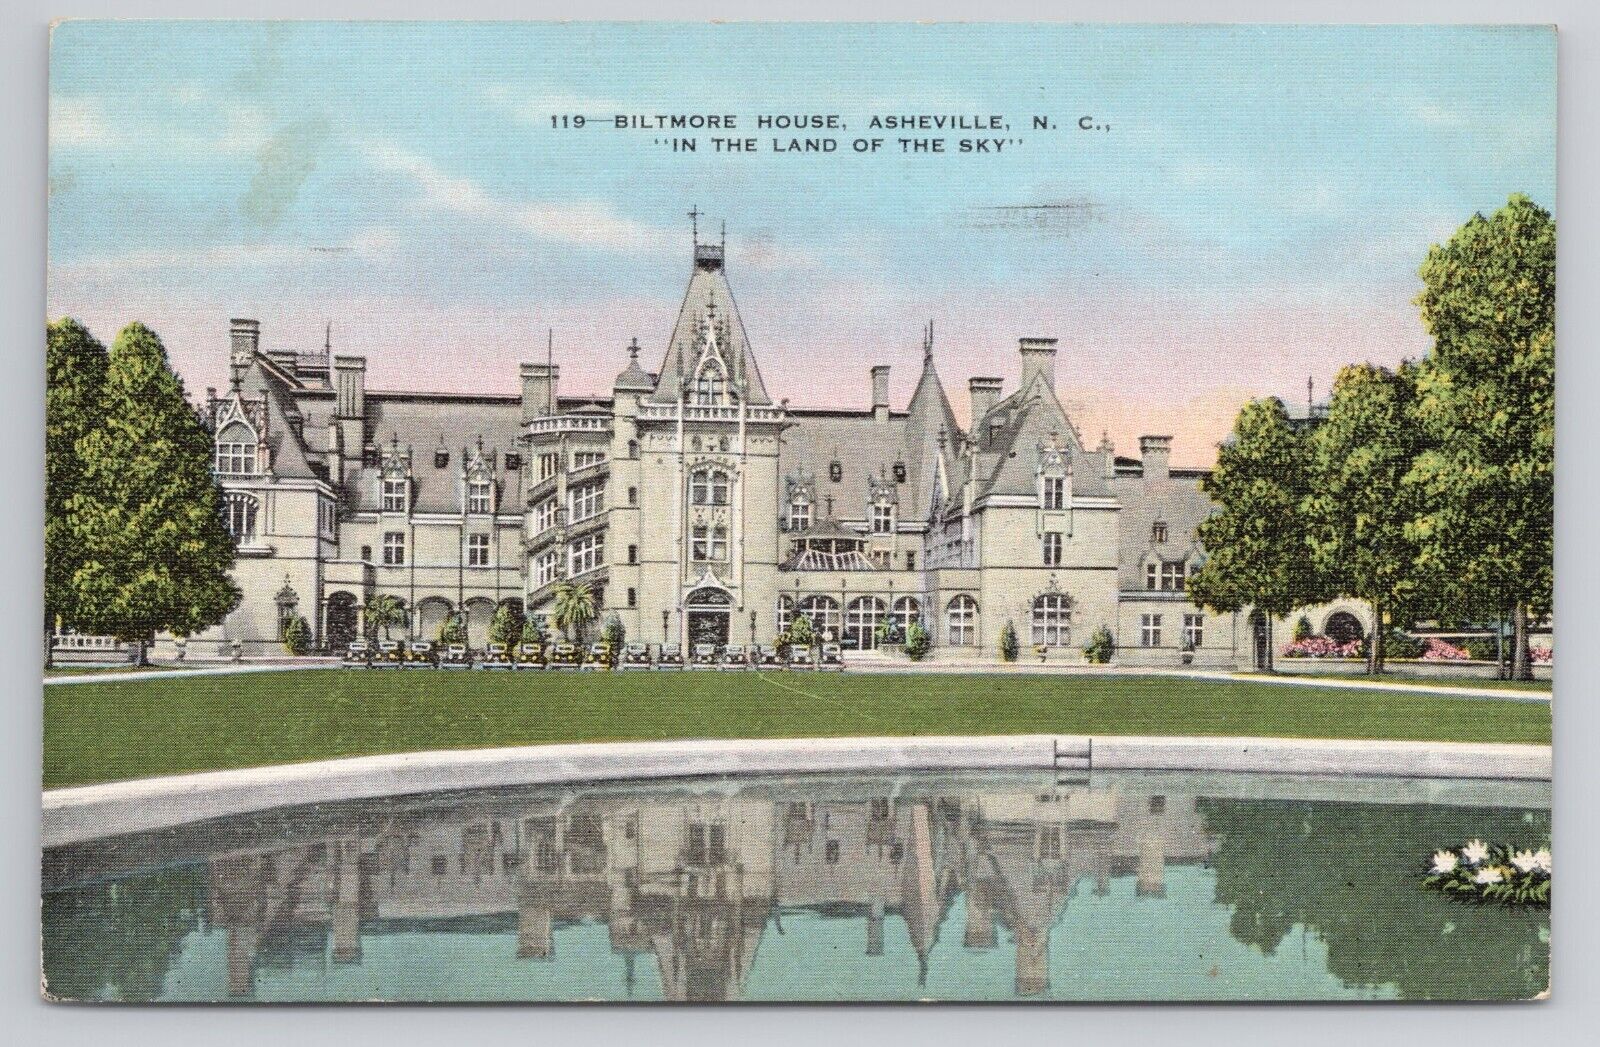 Biltmore House Asheville NC In The Land of the Sky Linen Postcard No 5628